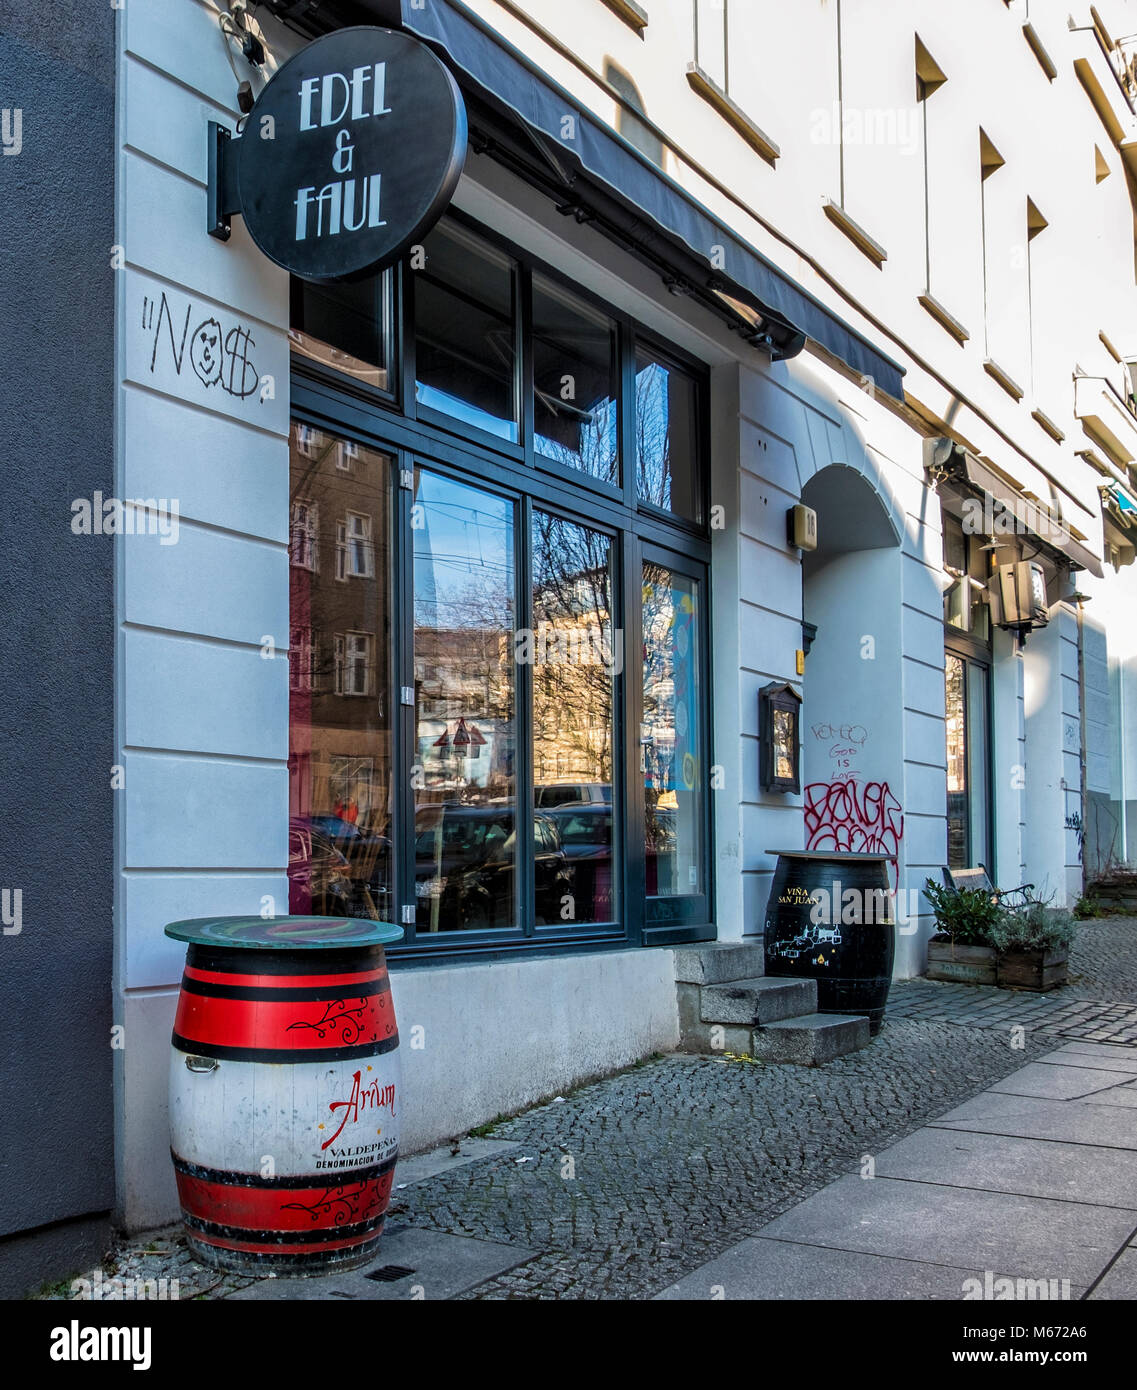 Berlin, Mitte. Edel & faul. Venue for artistic events and wine tasting. Events venue exterior with sign & wine barrels Stock Photo